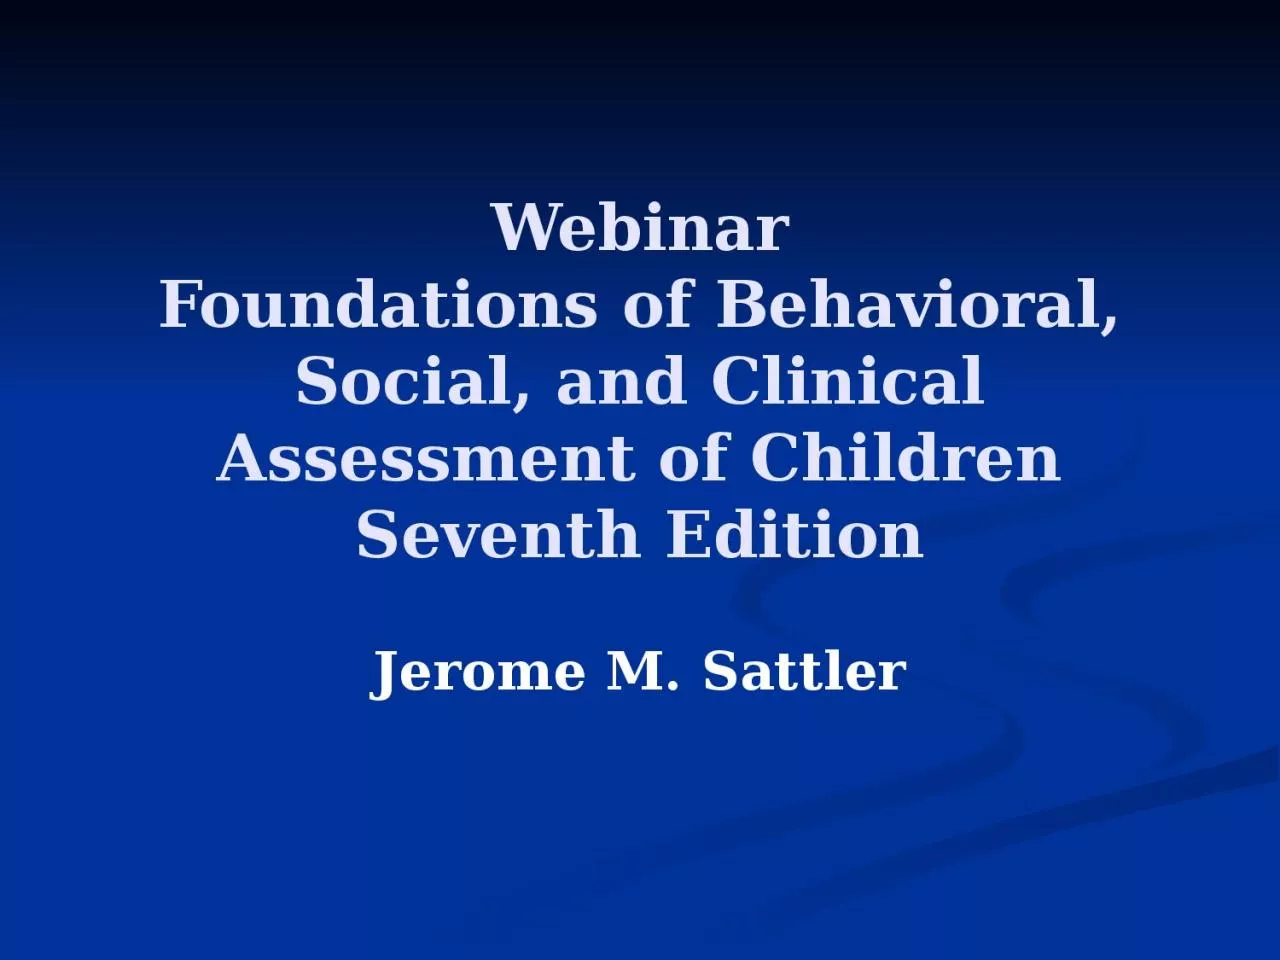 Webinar Foundations of Behavioral, Social, and Clinical Assessment of Children